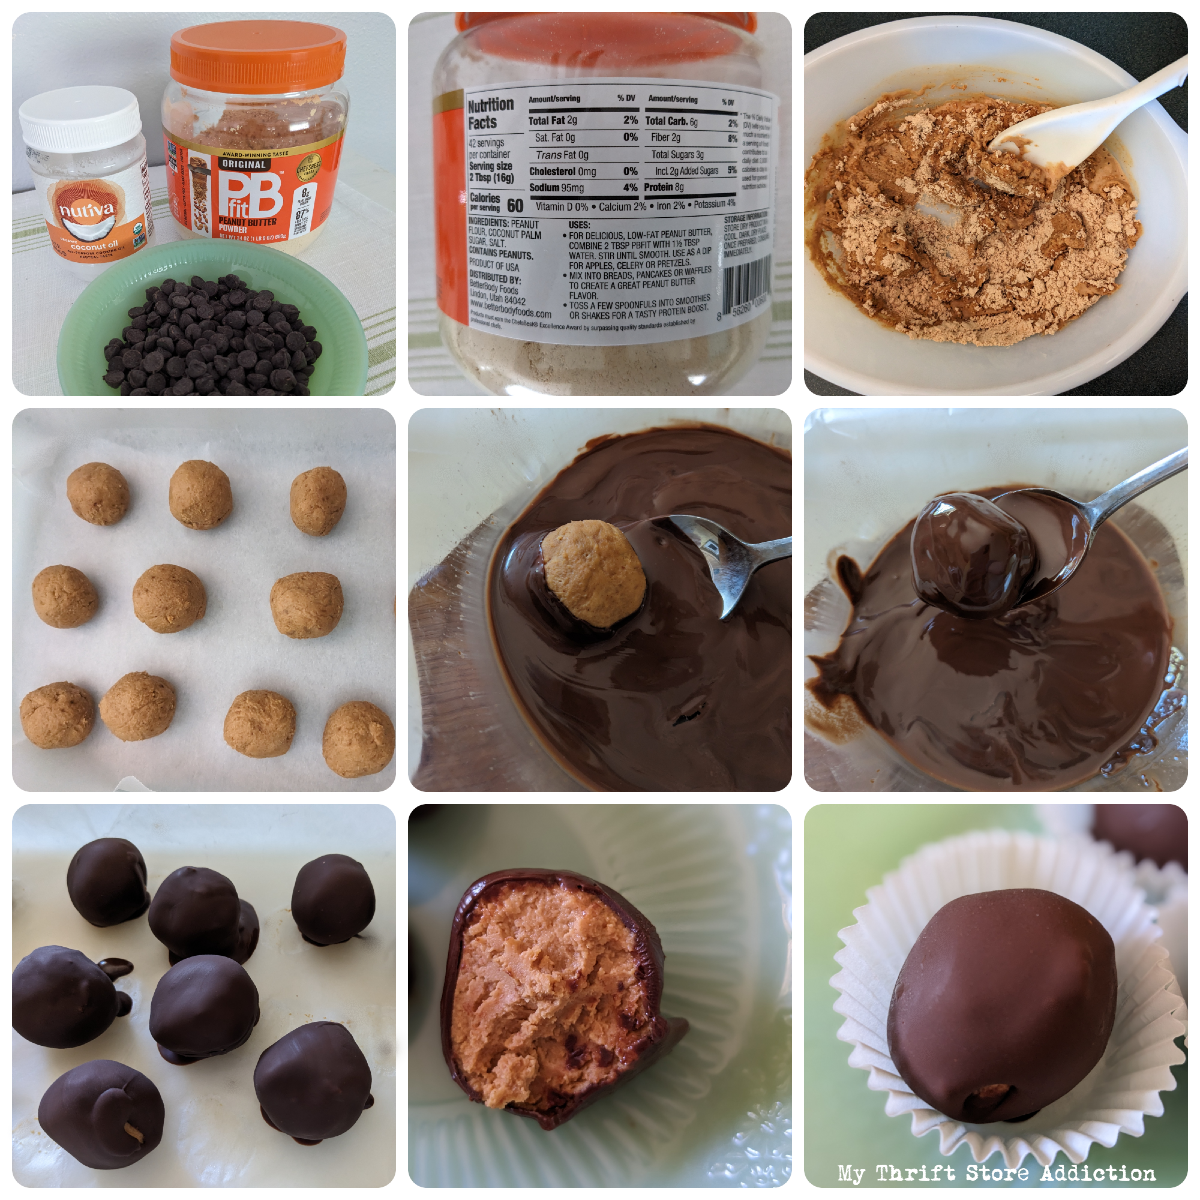 3 ingredient chocolate covered peanut butter balls